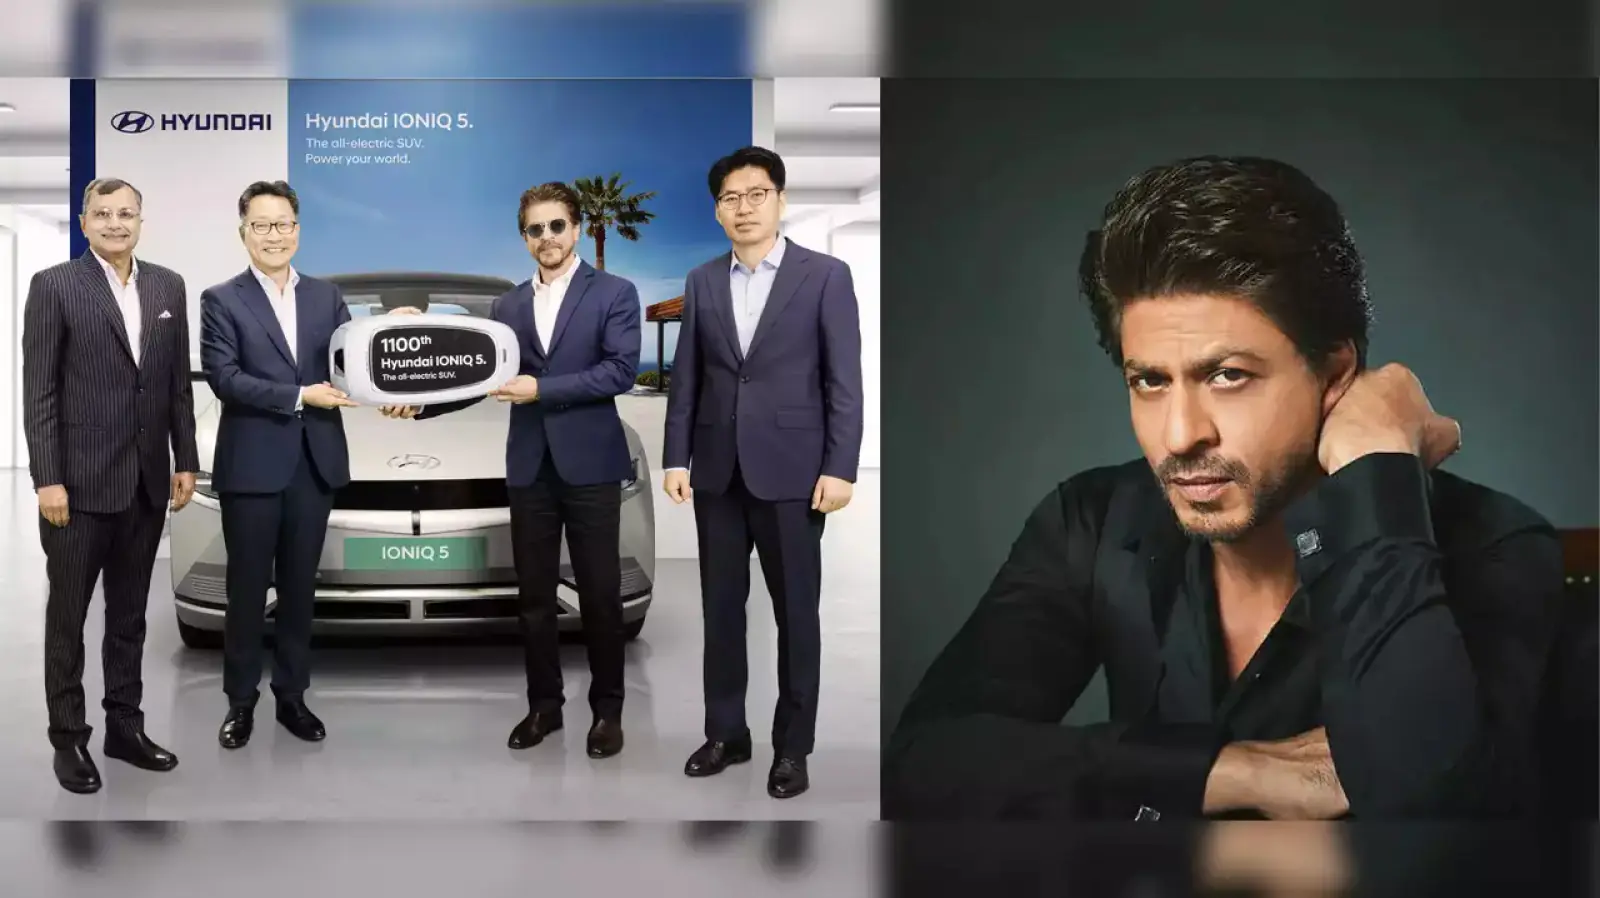 Hyundai delivered the 1100th unit of Ioniq 5 to Shah Rukh Khan, know the features of this EV